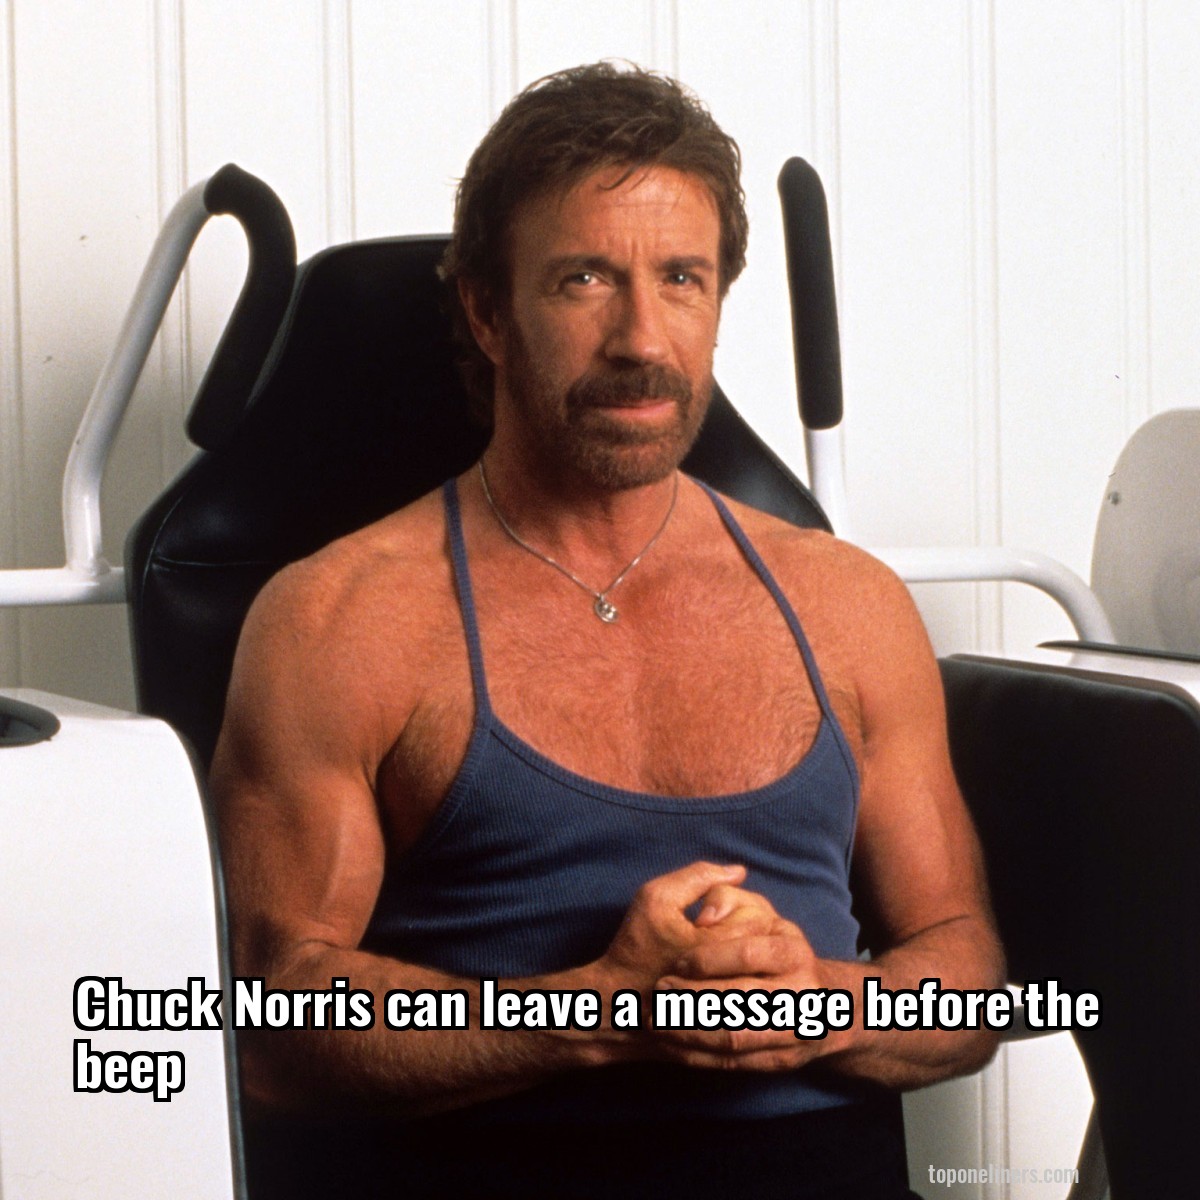 Chuck Norris can leave a message before the beep